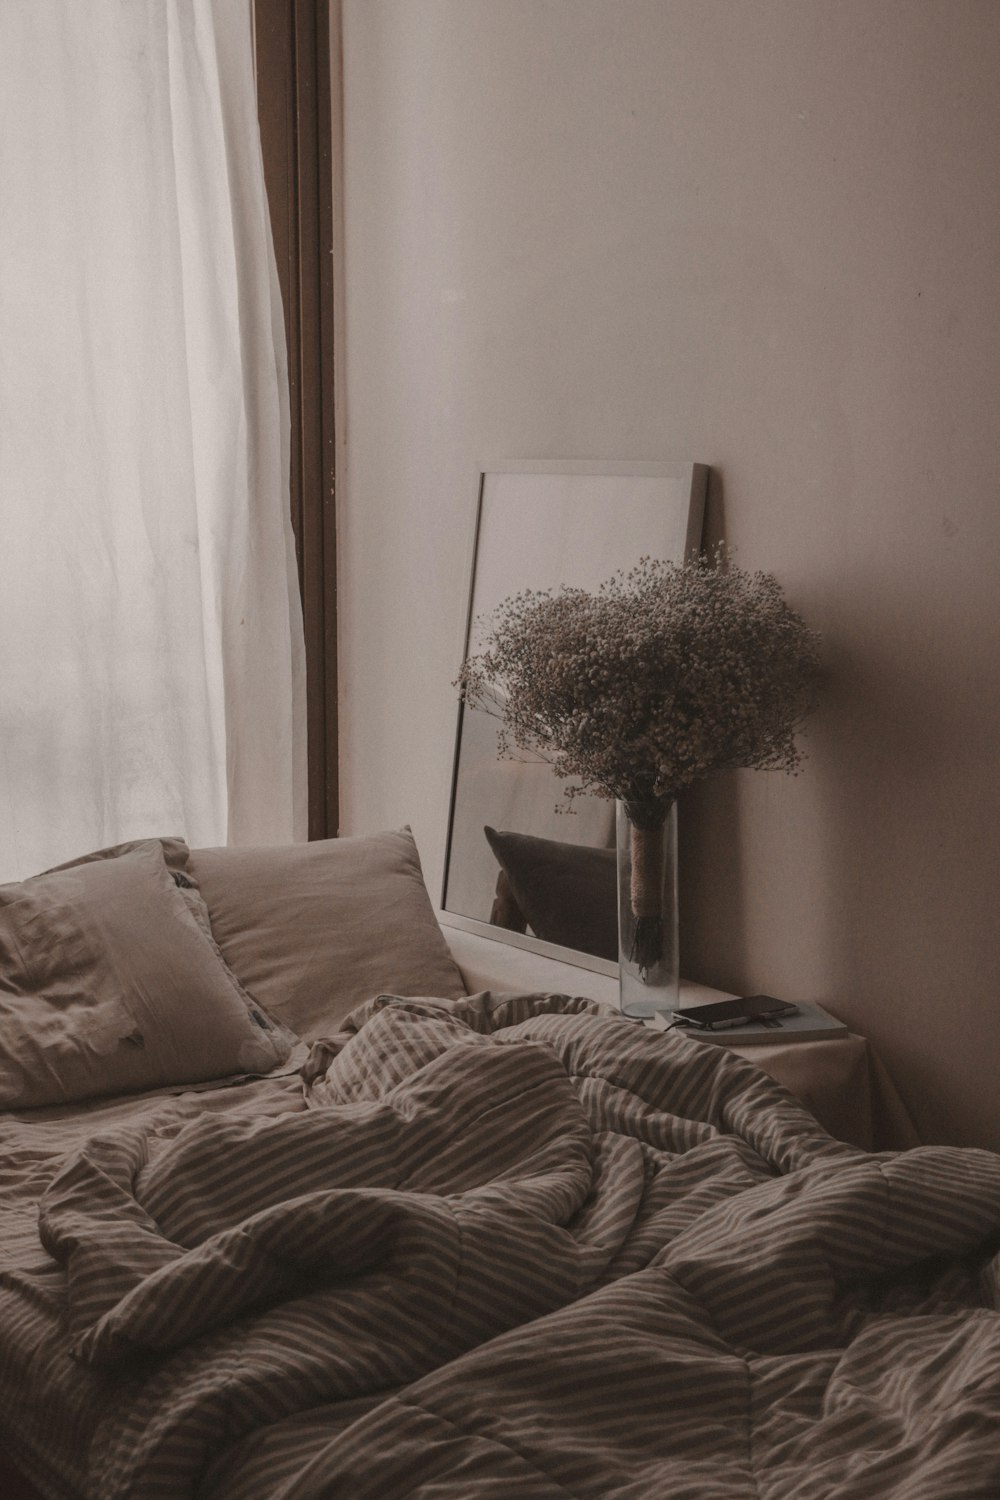 a bed with a blanket and a vase with flowers